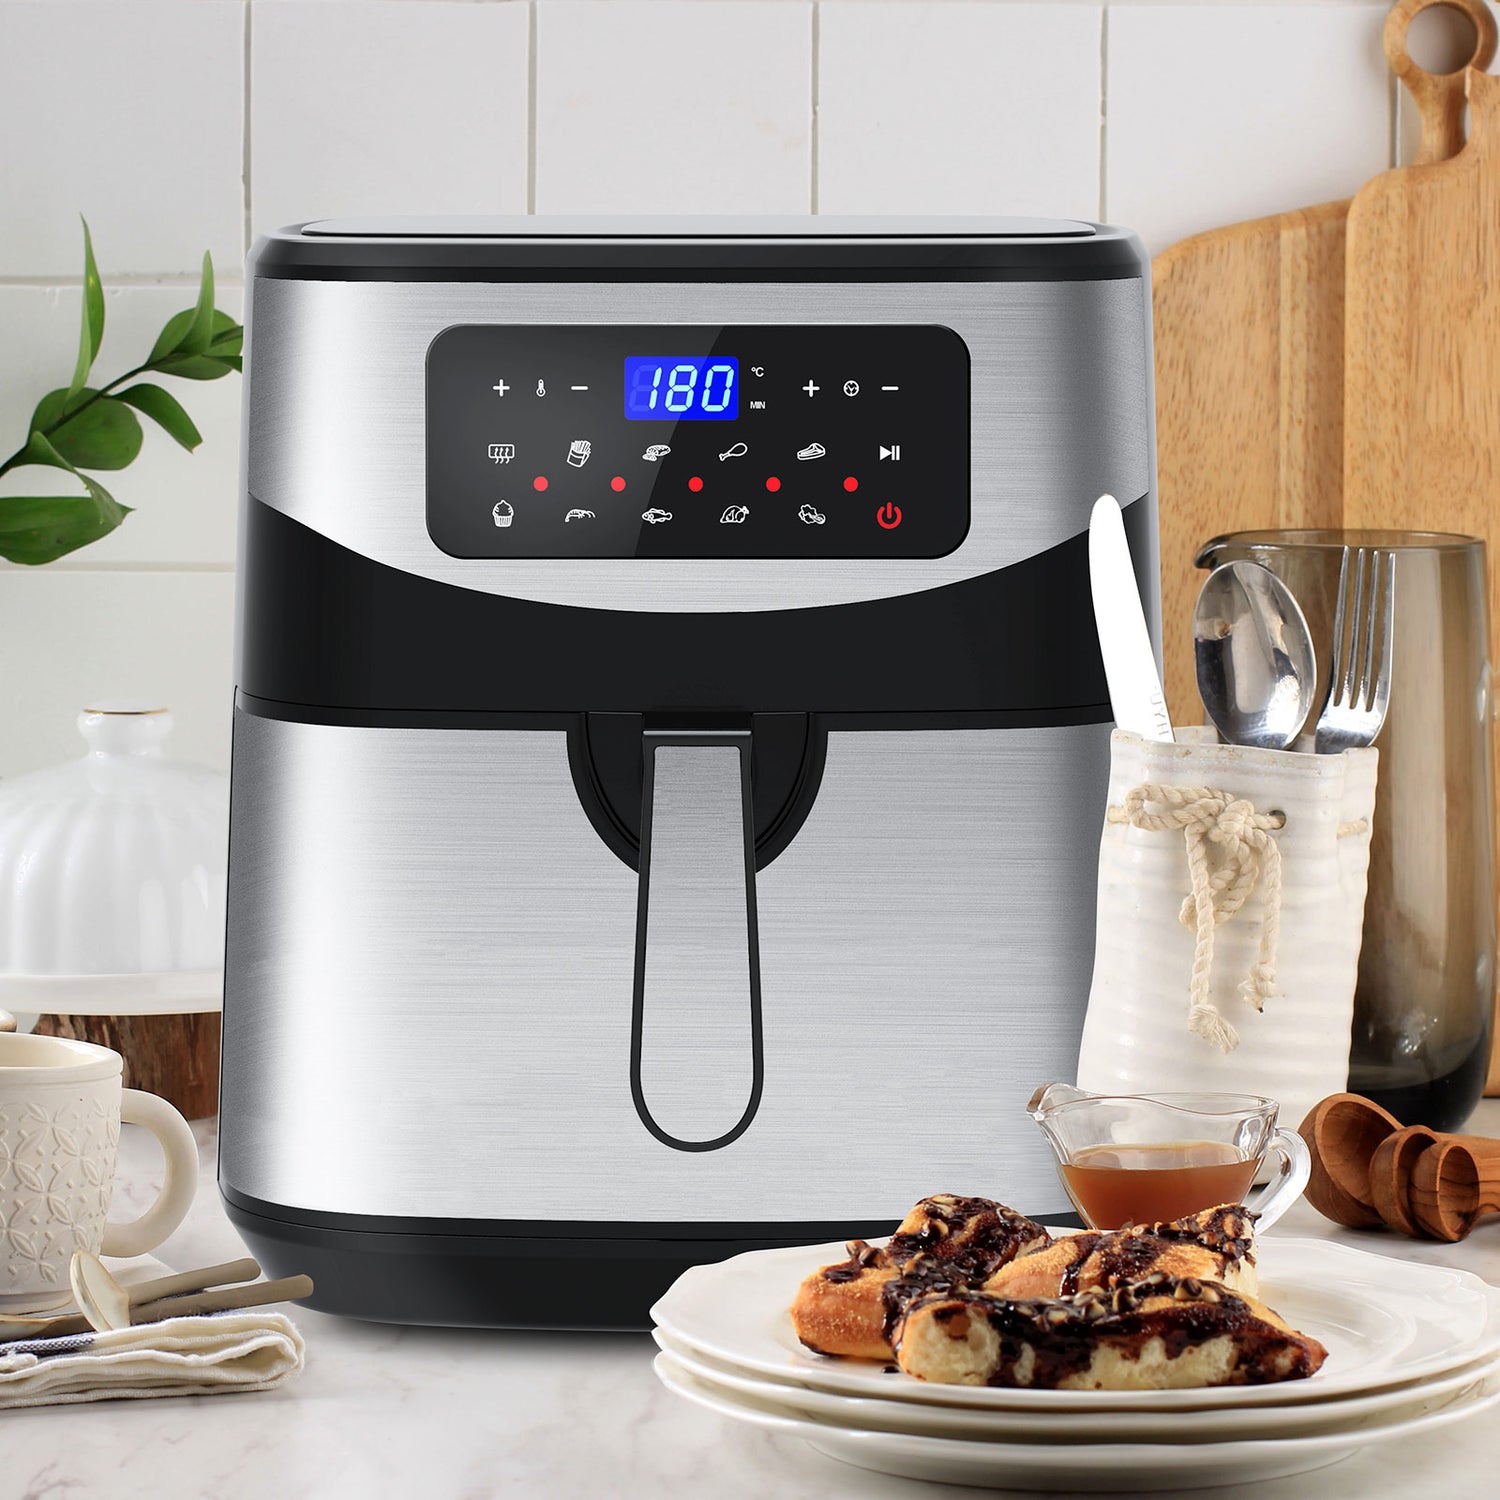 Kitchen Couture 12 Litre Air Fryer Multifunctional LCD One Touch Display-Small Kitchen Appliances-PEROZ Accessories